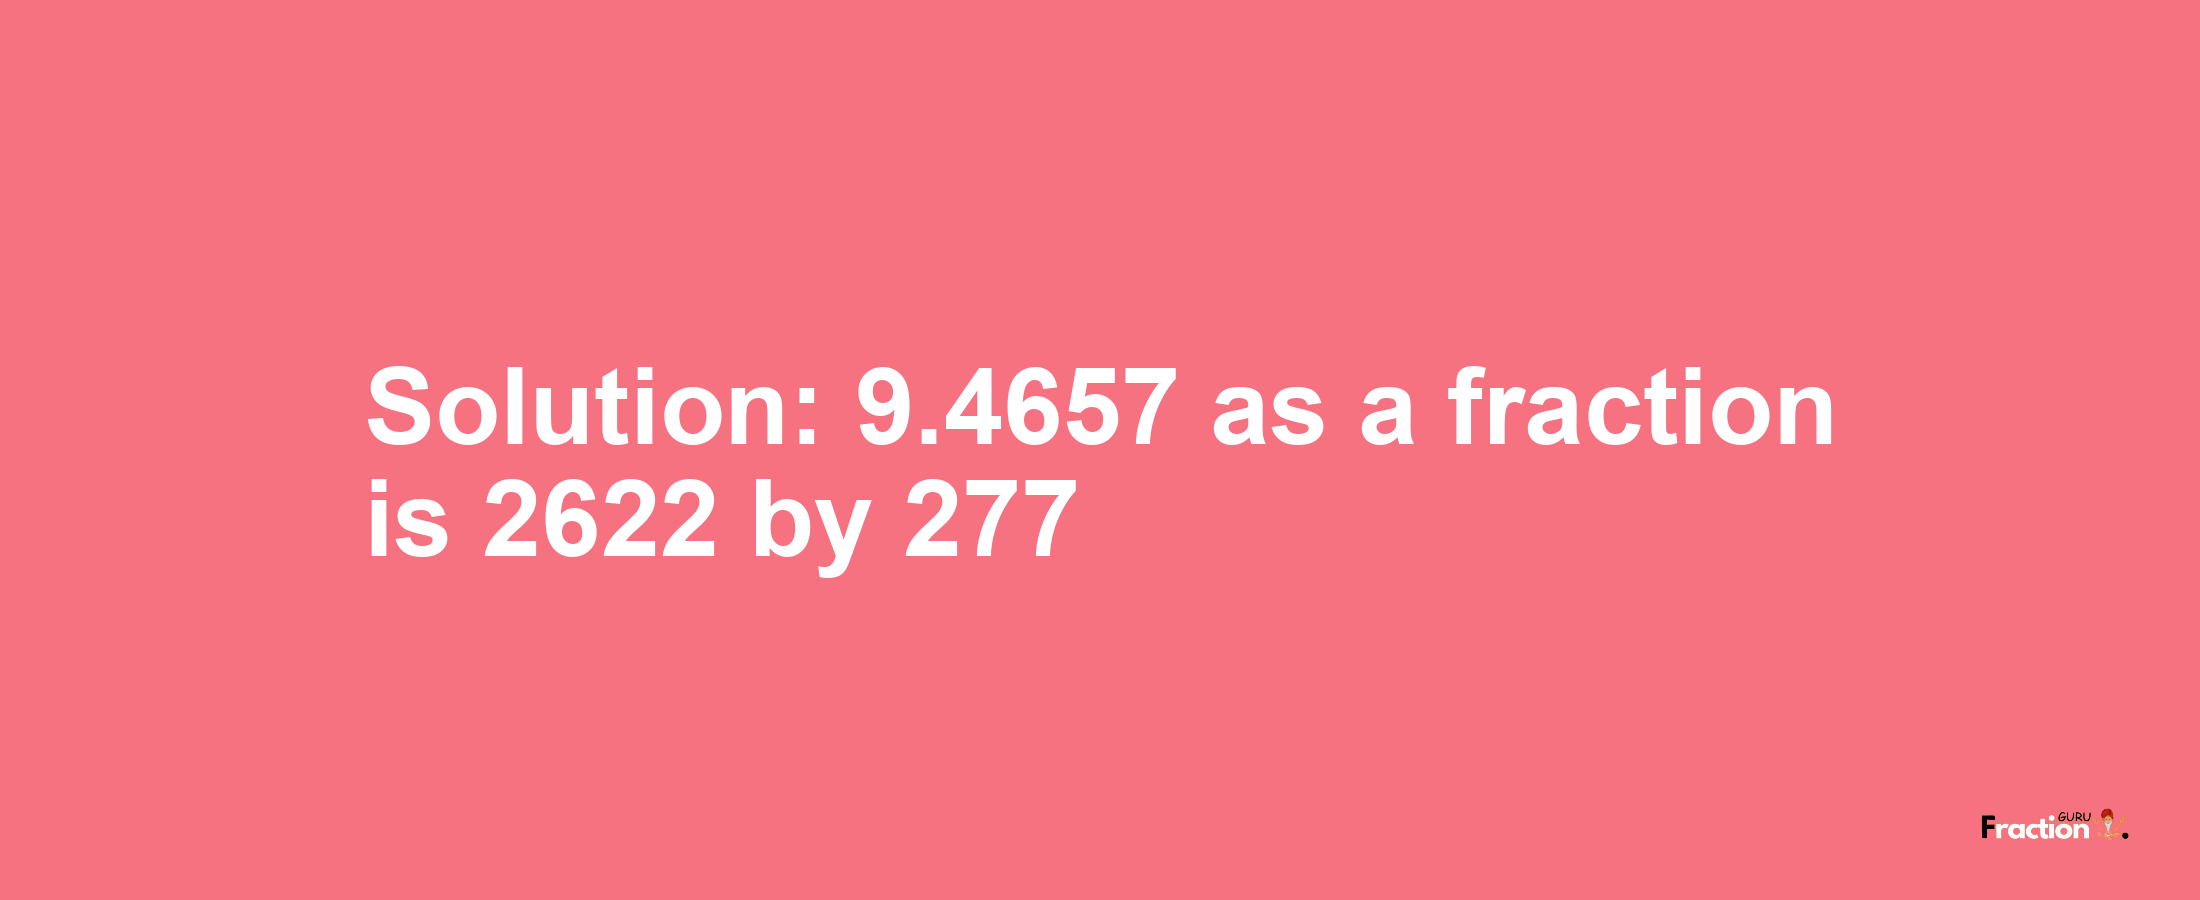 Solution:9.4657 as a fraction is 2622/277